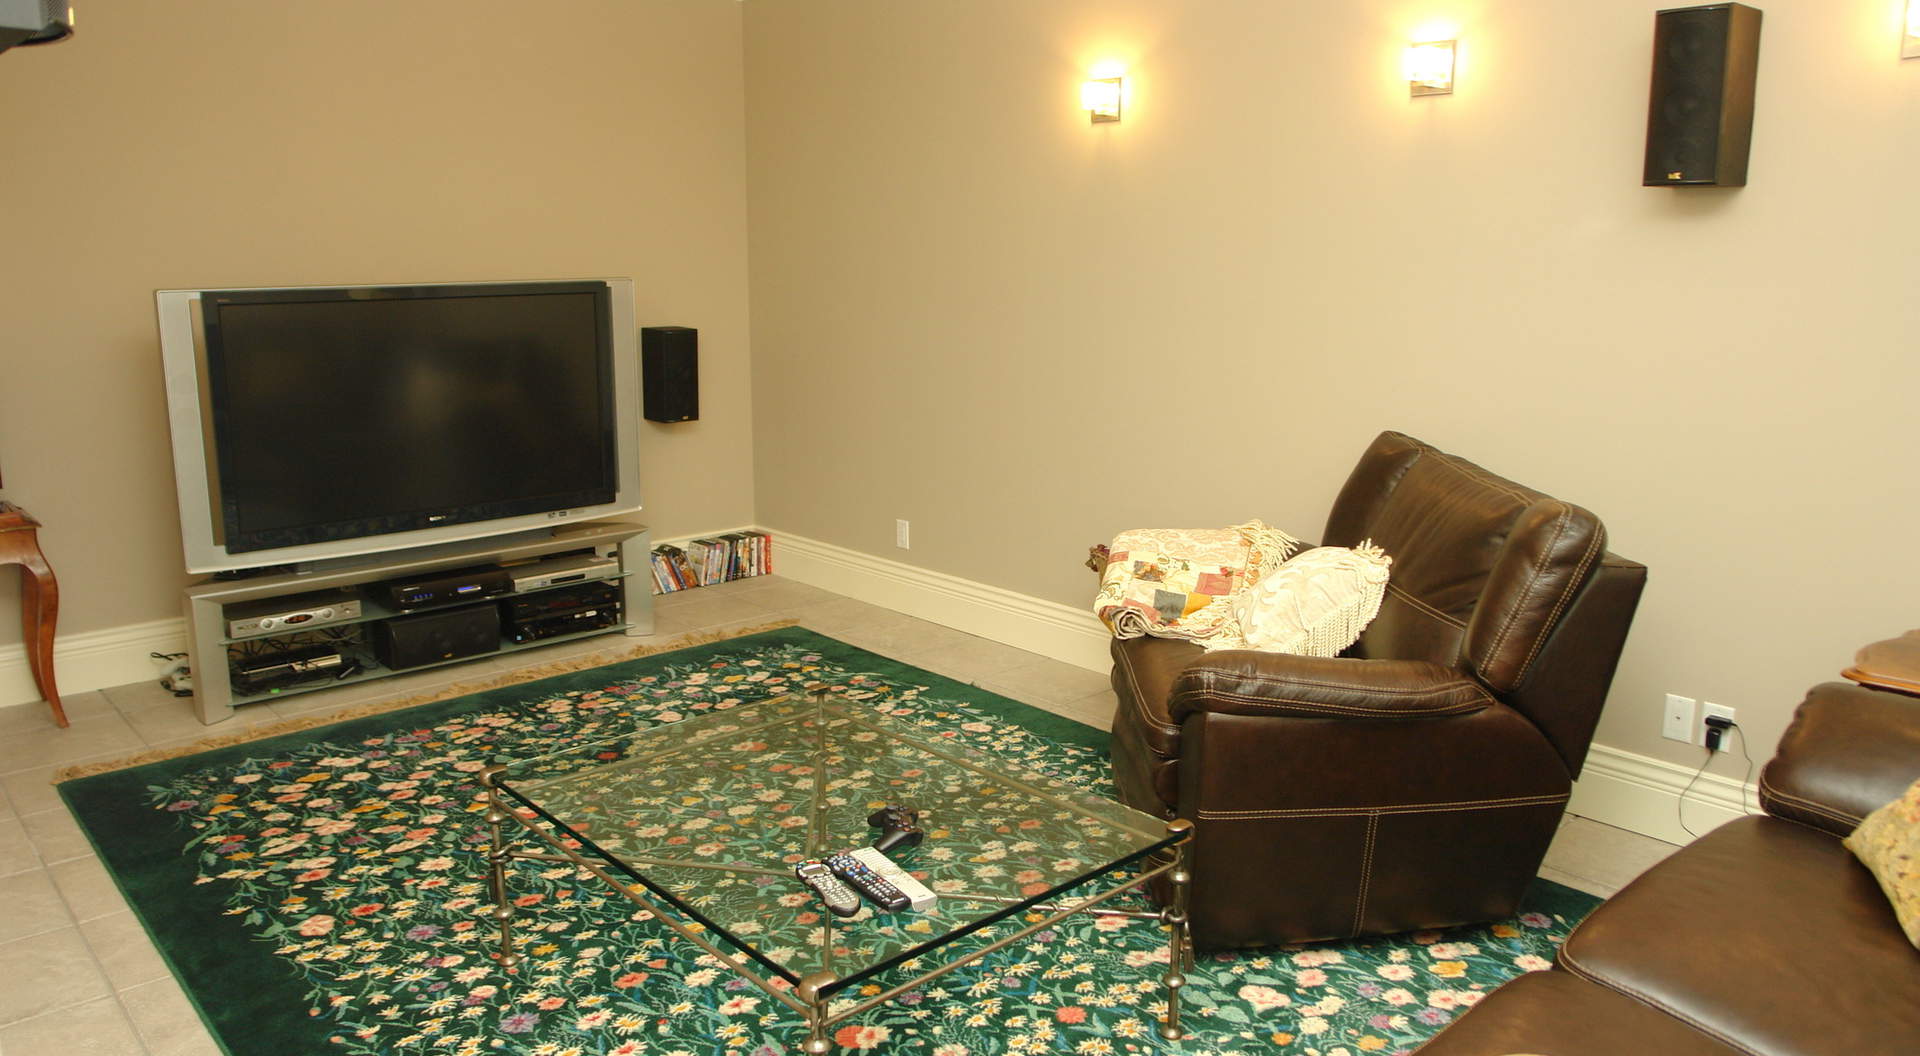 Home Theatre Downstairs